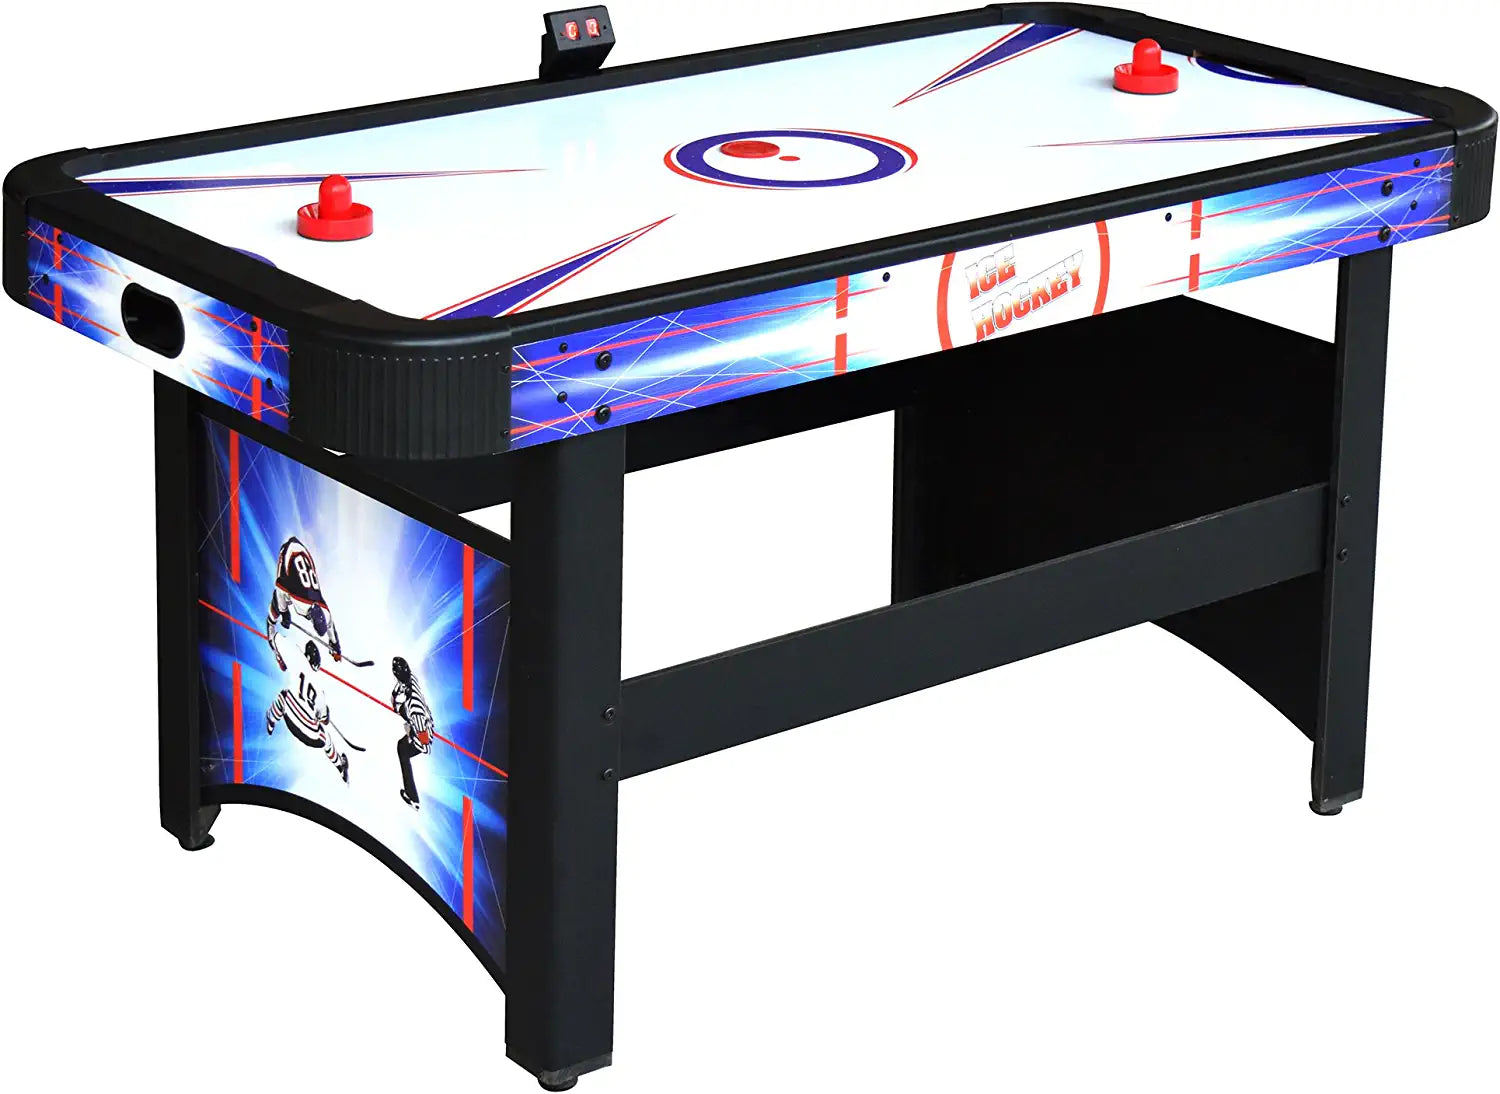 Hathaway Patriot 5-Ft Air Hockey Table for Kids and Adults, Great for Family Recreation Game Rooms, Electronic Scoring, Leg Levelers and Built-in Puck Return √É¬¢√¢‚Äö¬¨√¢‚Ç¨≈ì Includes Strikers and Pucks, Blue/Black